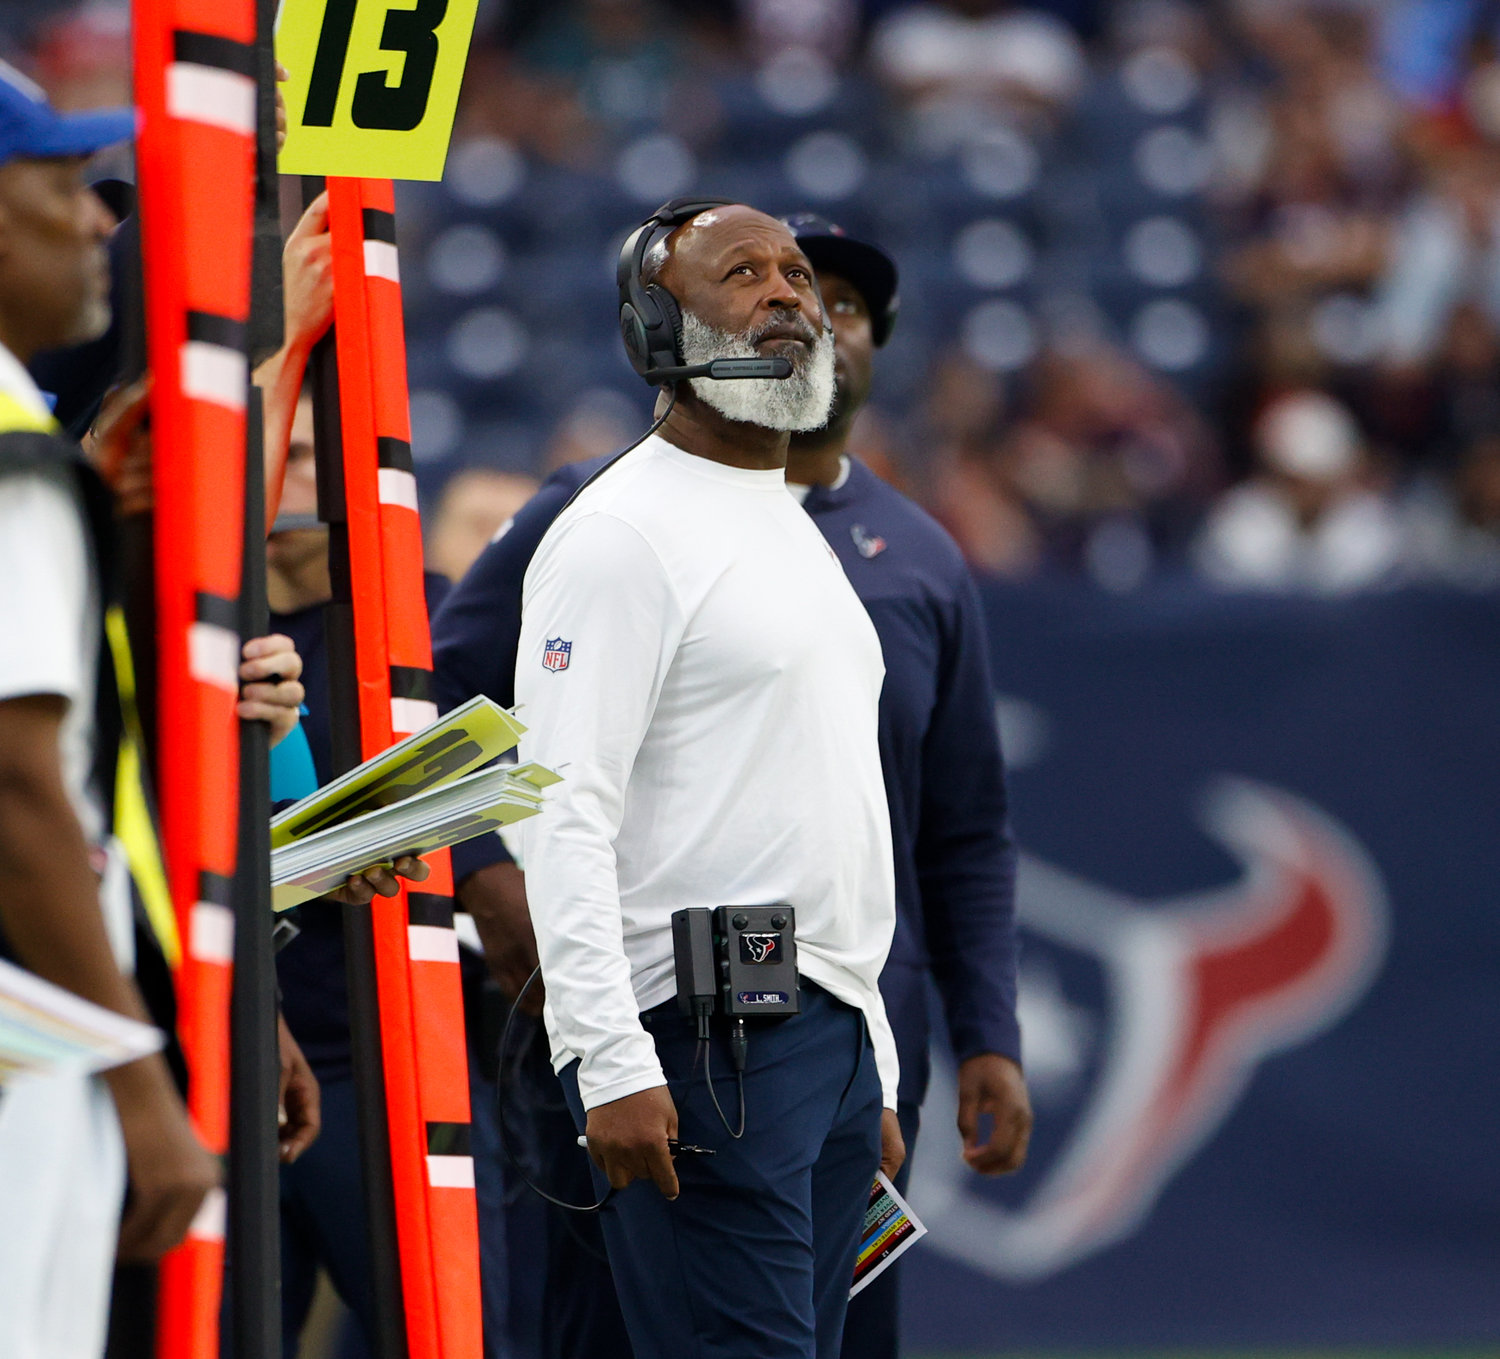 Texans head coach Lovie Smith looks up at the video board during the fourth quarter of an NFL game between the Houston Texans and the Jacksonville Jaguars on Jan. 1, 2023 in Houston. The Jaguars won, 31-3 in Houston’s final home game of the season.